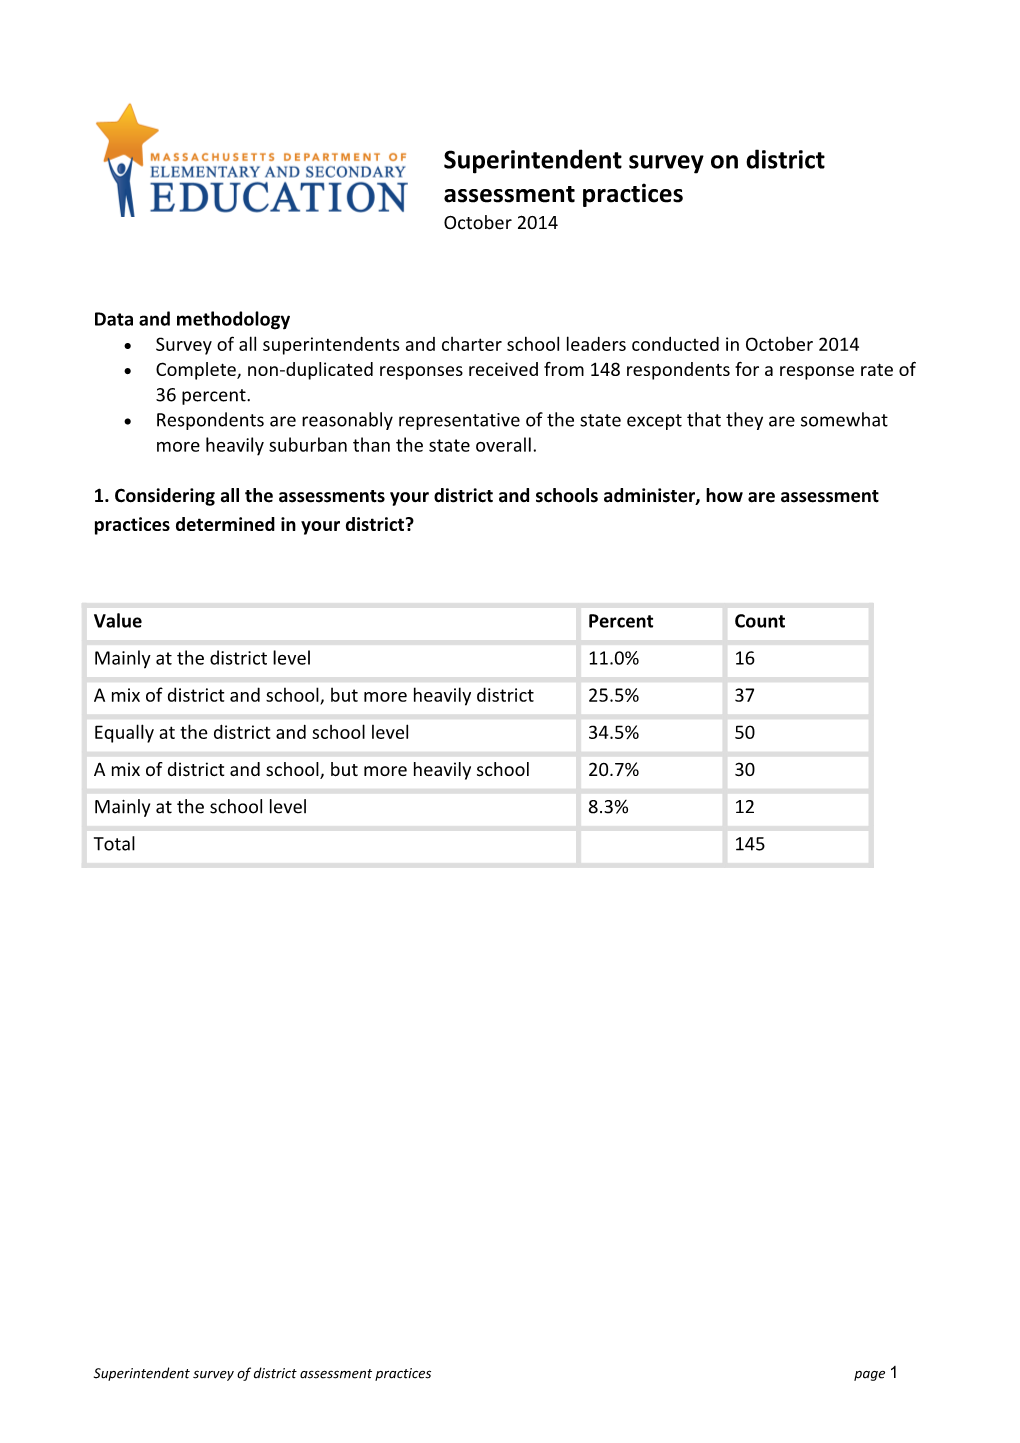 Superintendent Survey on District Assessment Practices (October 2014)